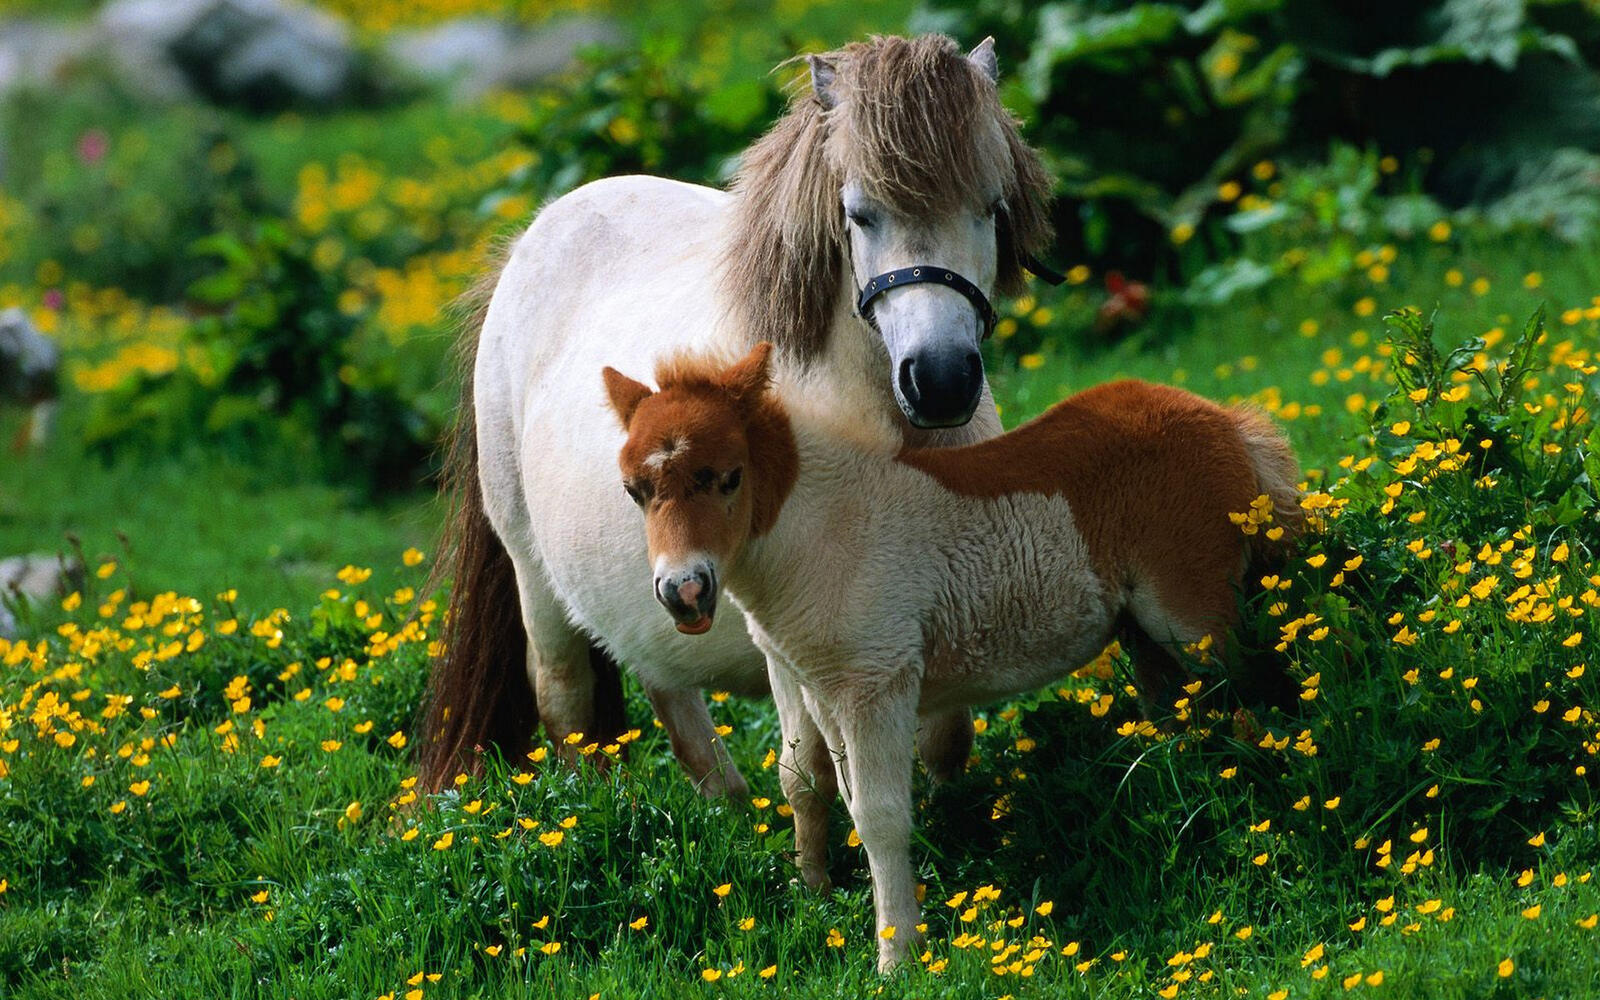 Wallpapers pony horse foal on the desktop